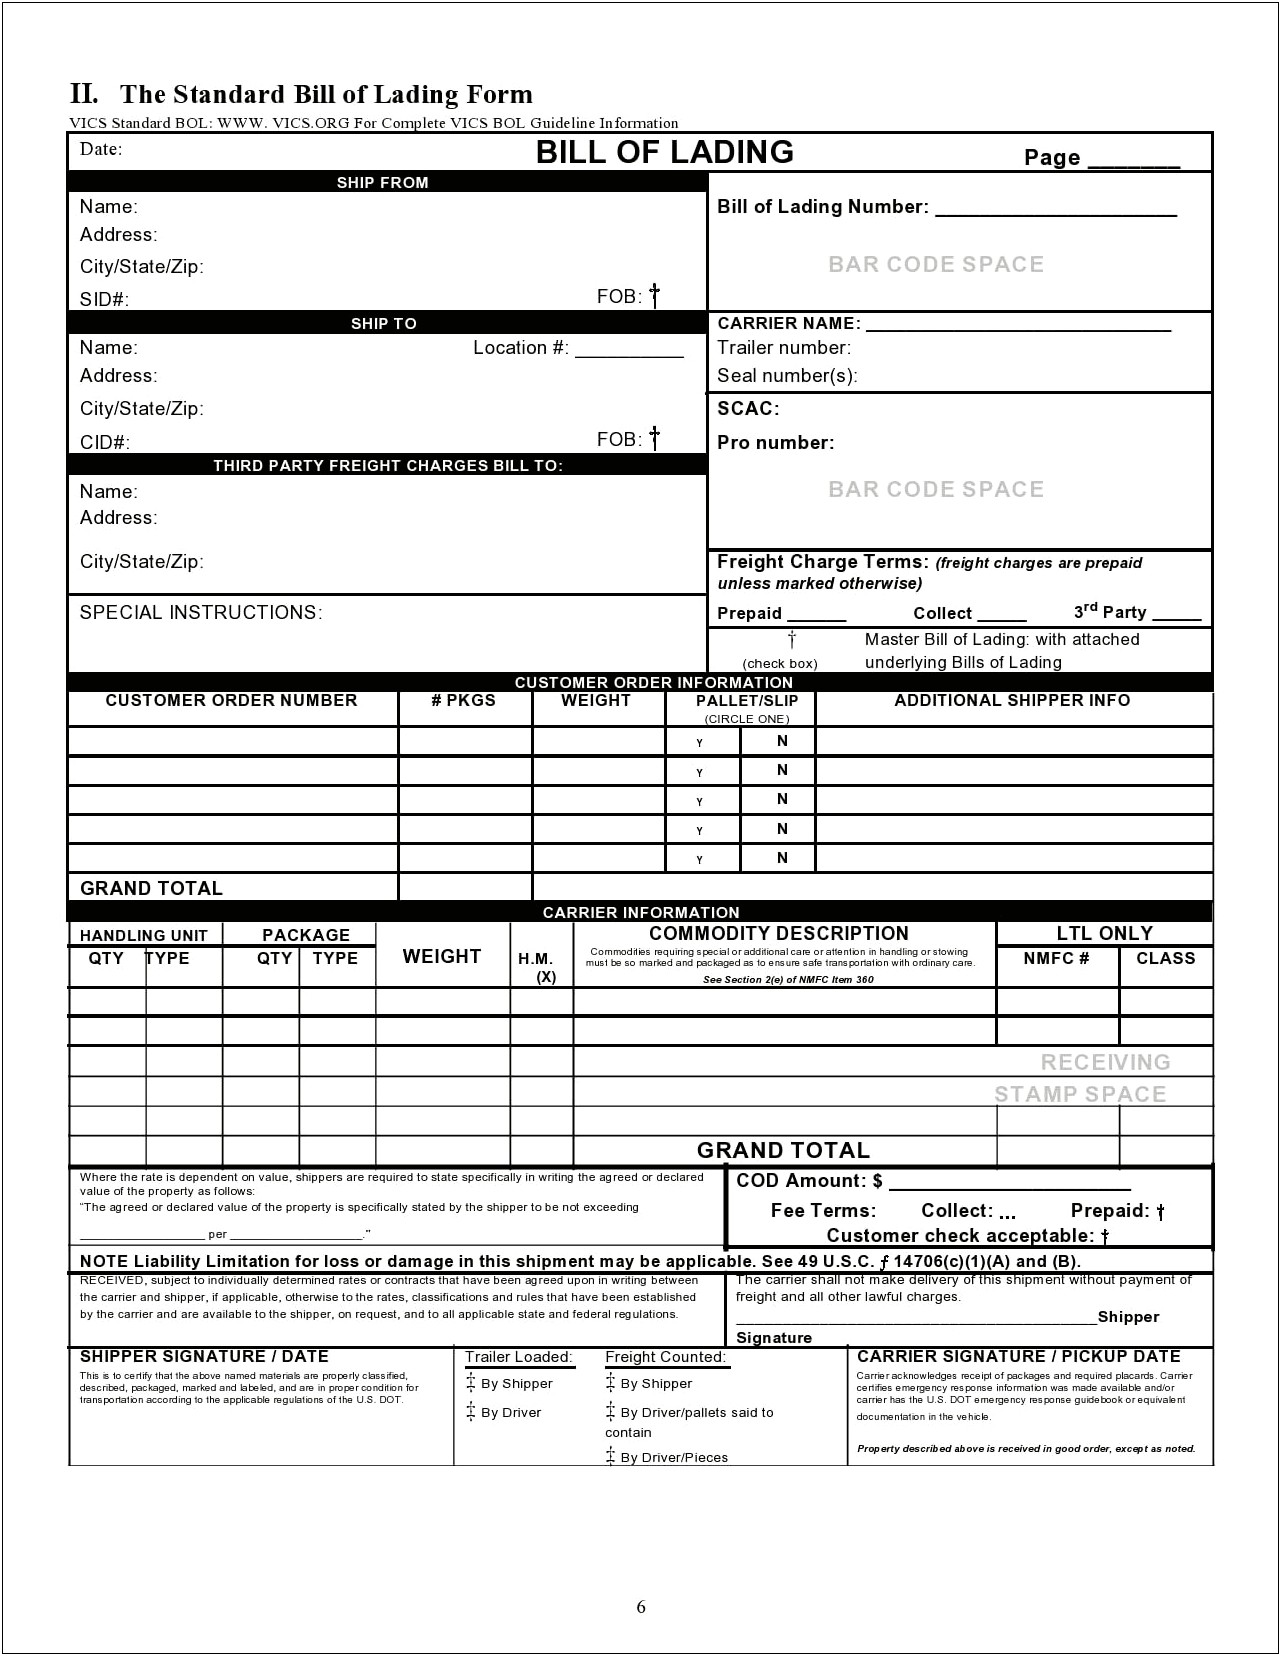 free-printable-bill-of-lading-template-excel-templates-resume-designs-e8j79nlxvn